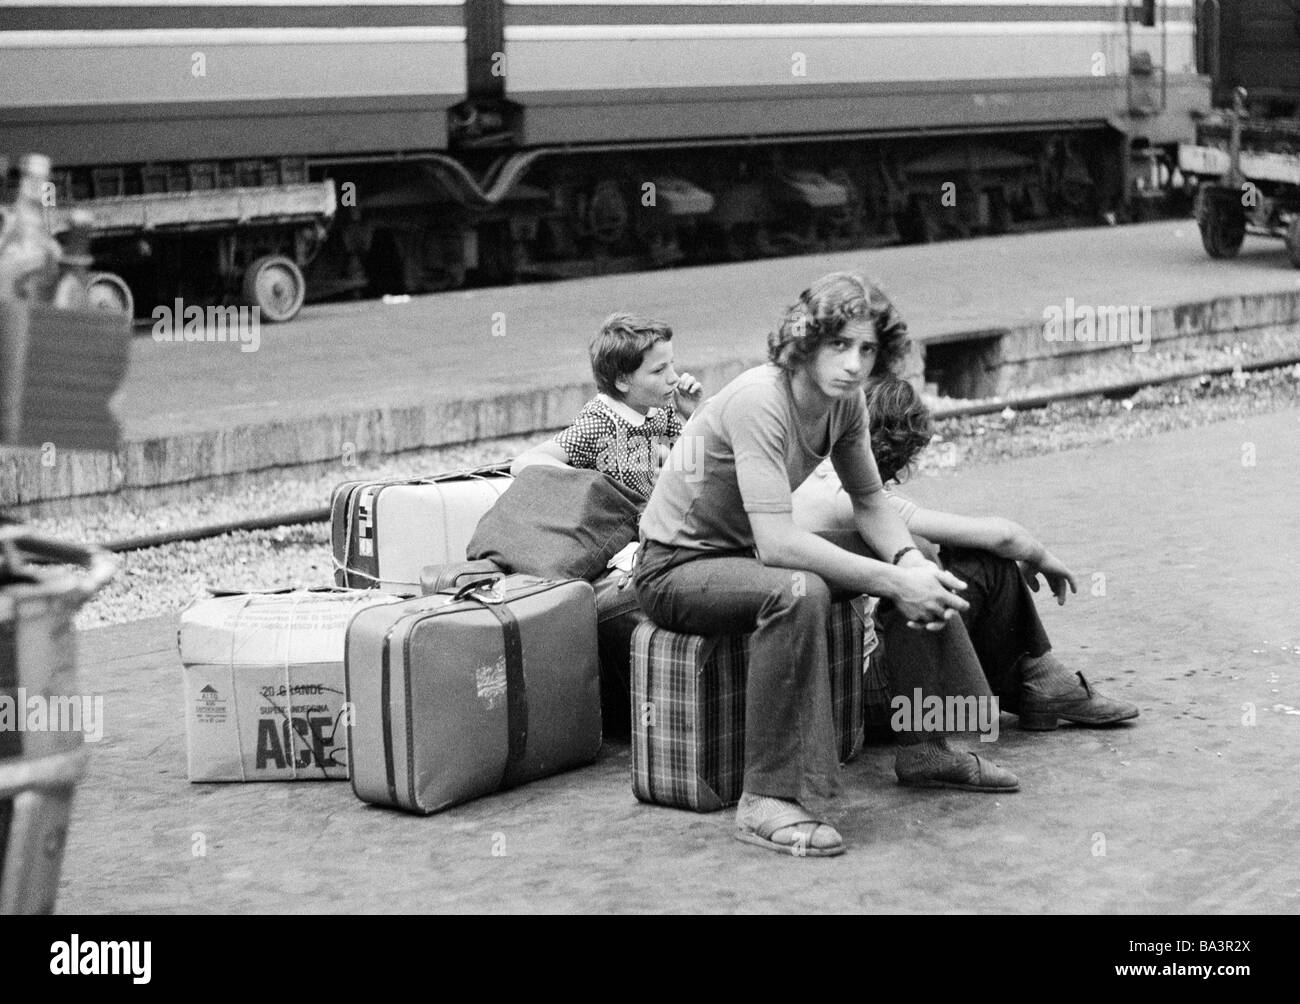 Seventies, black and white photo, railway station, Milan Central Station, young boy and little sister on the platform sit on their luggage and wait for the train, aged 15 to 18 years, 10 to 14 years, Italy, Lombardy, Milan Stock Photo